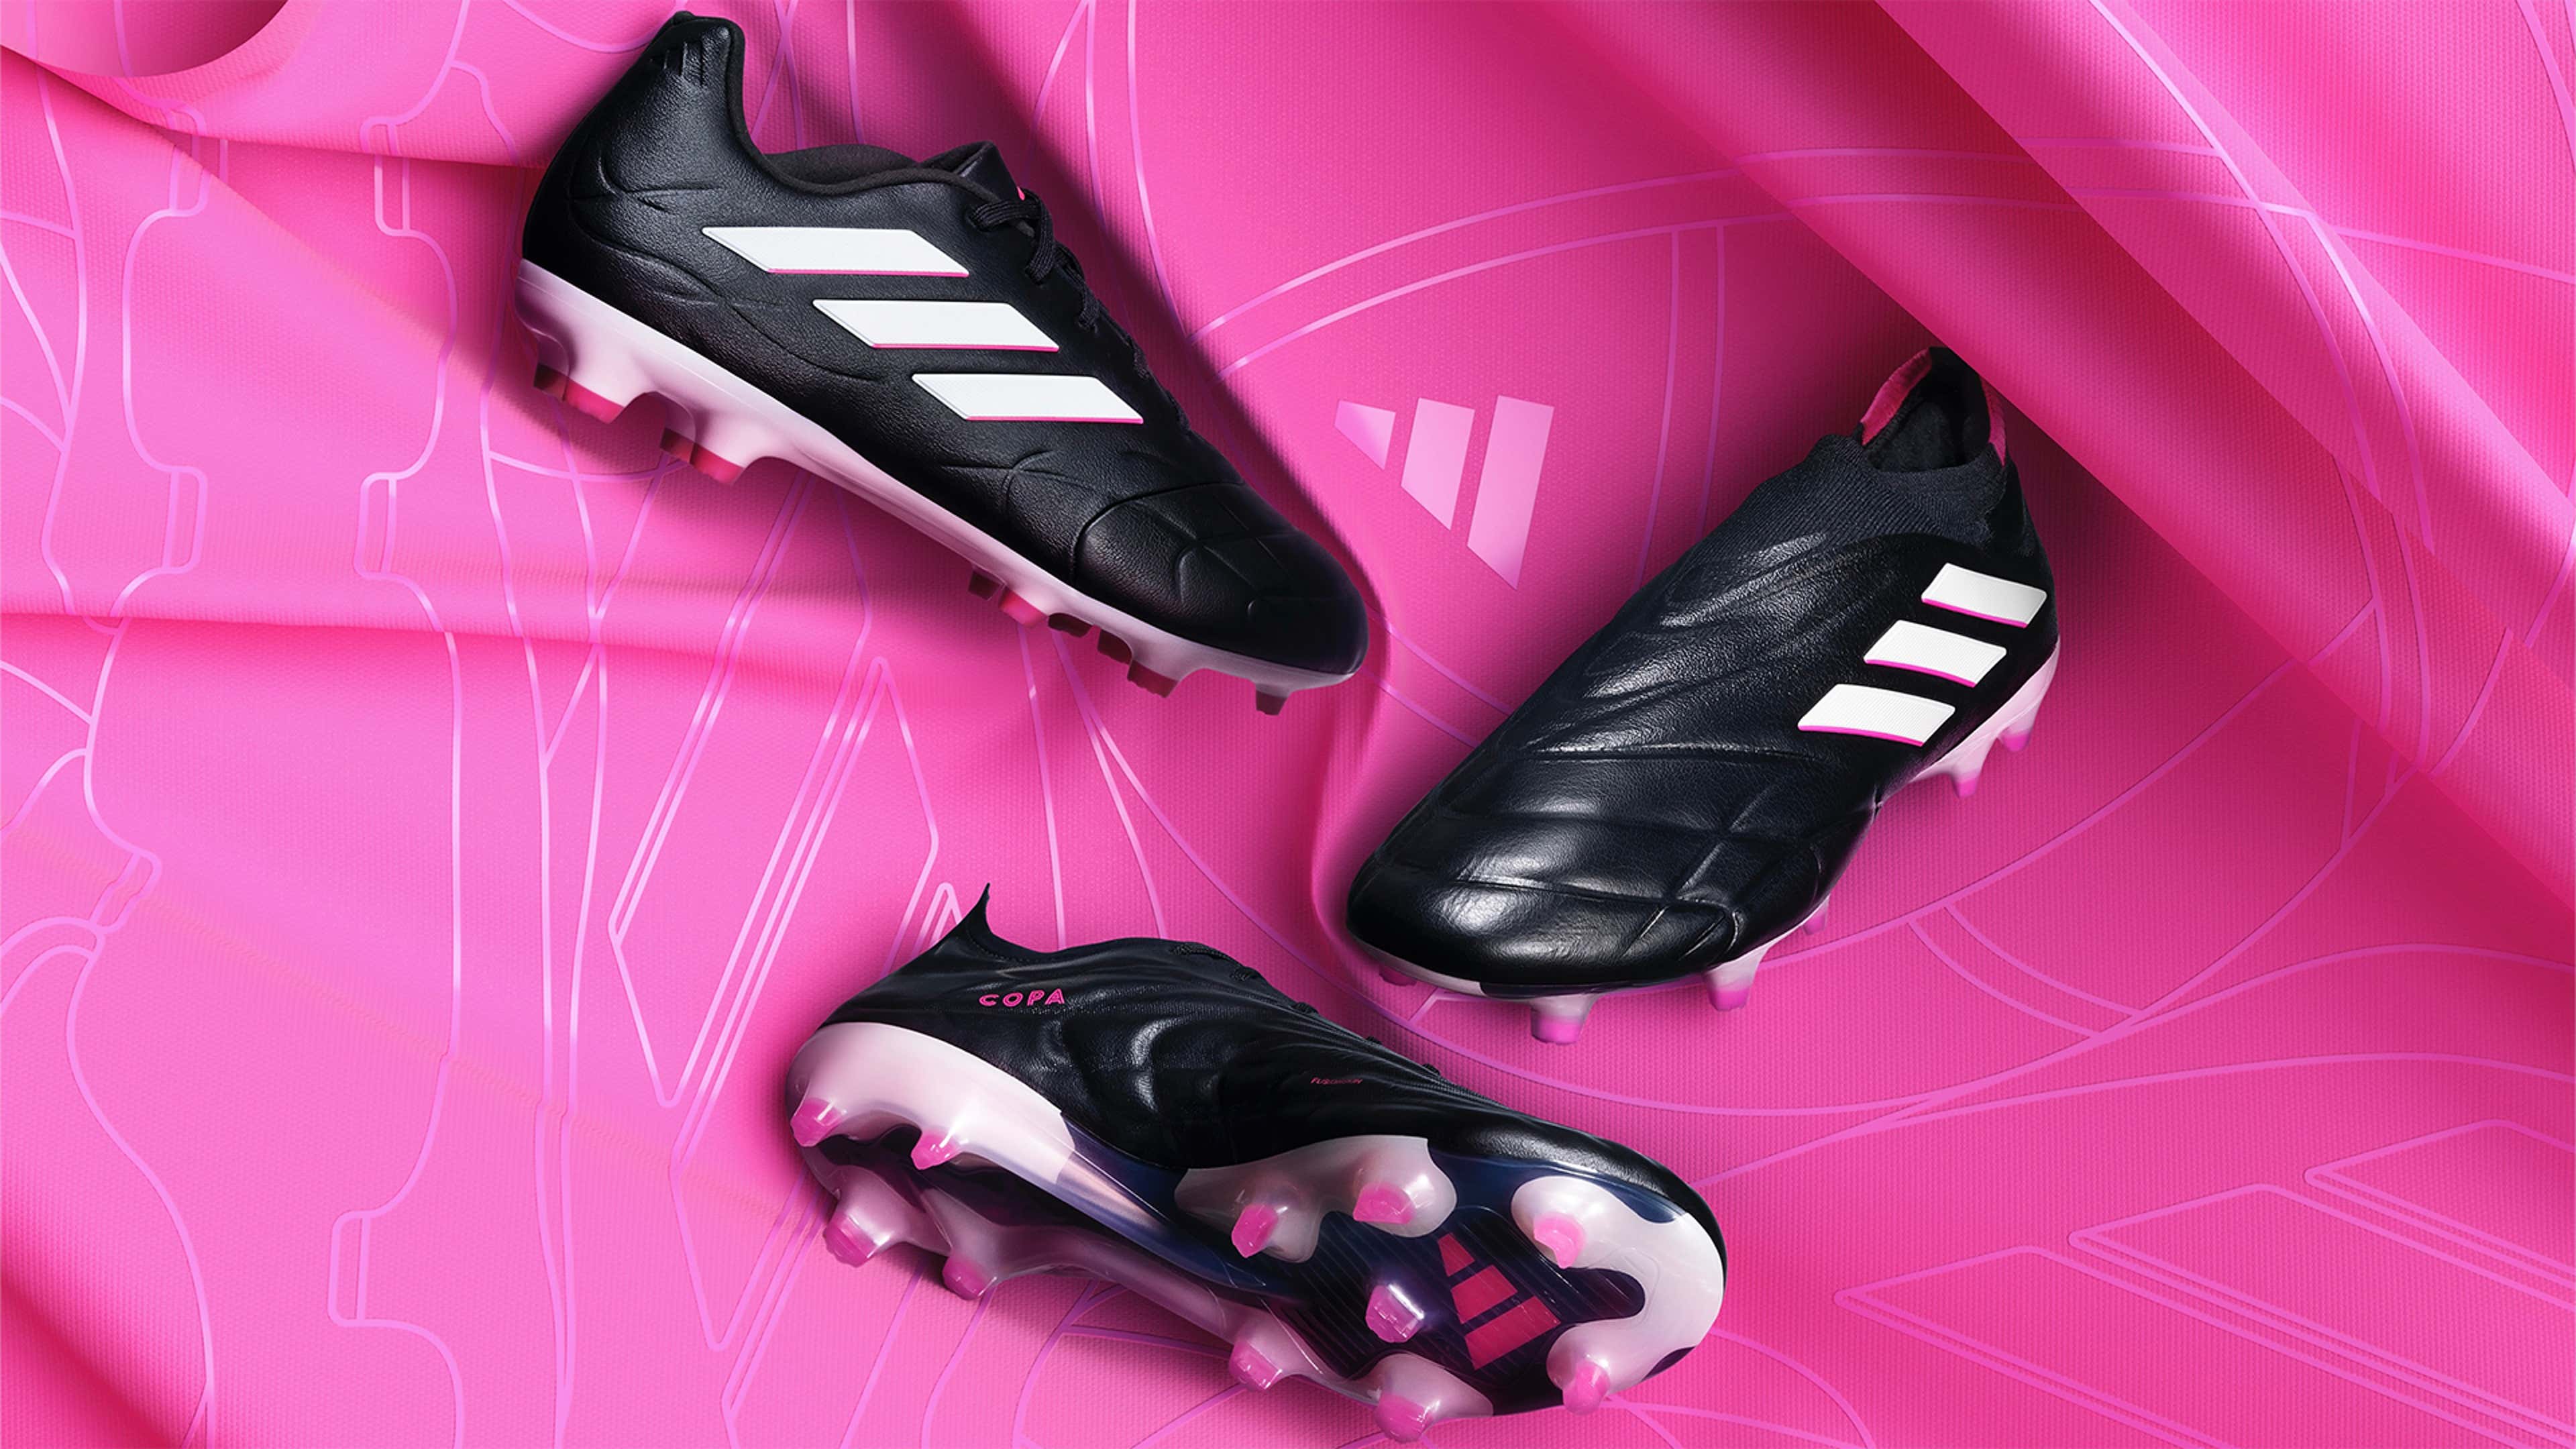 adidas expands the COPA line three new COPA Pure colourways | Goal.com